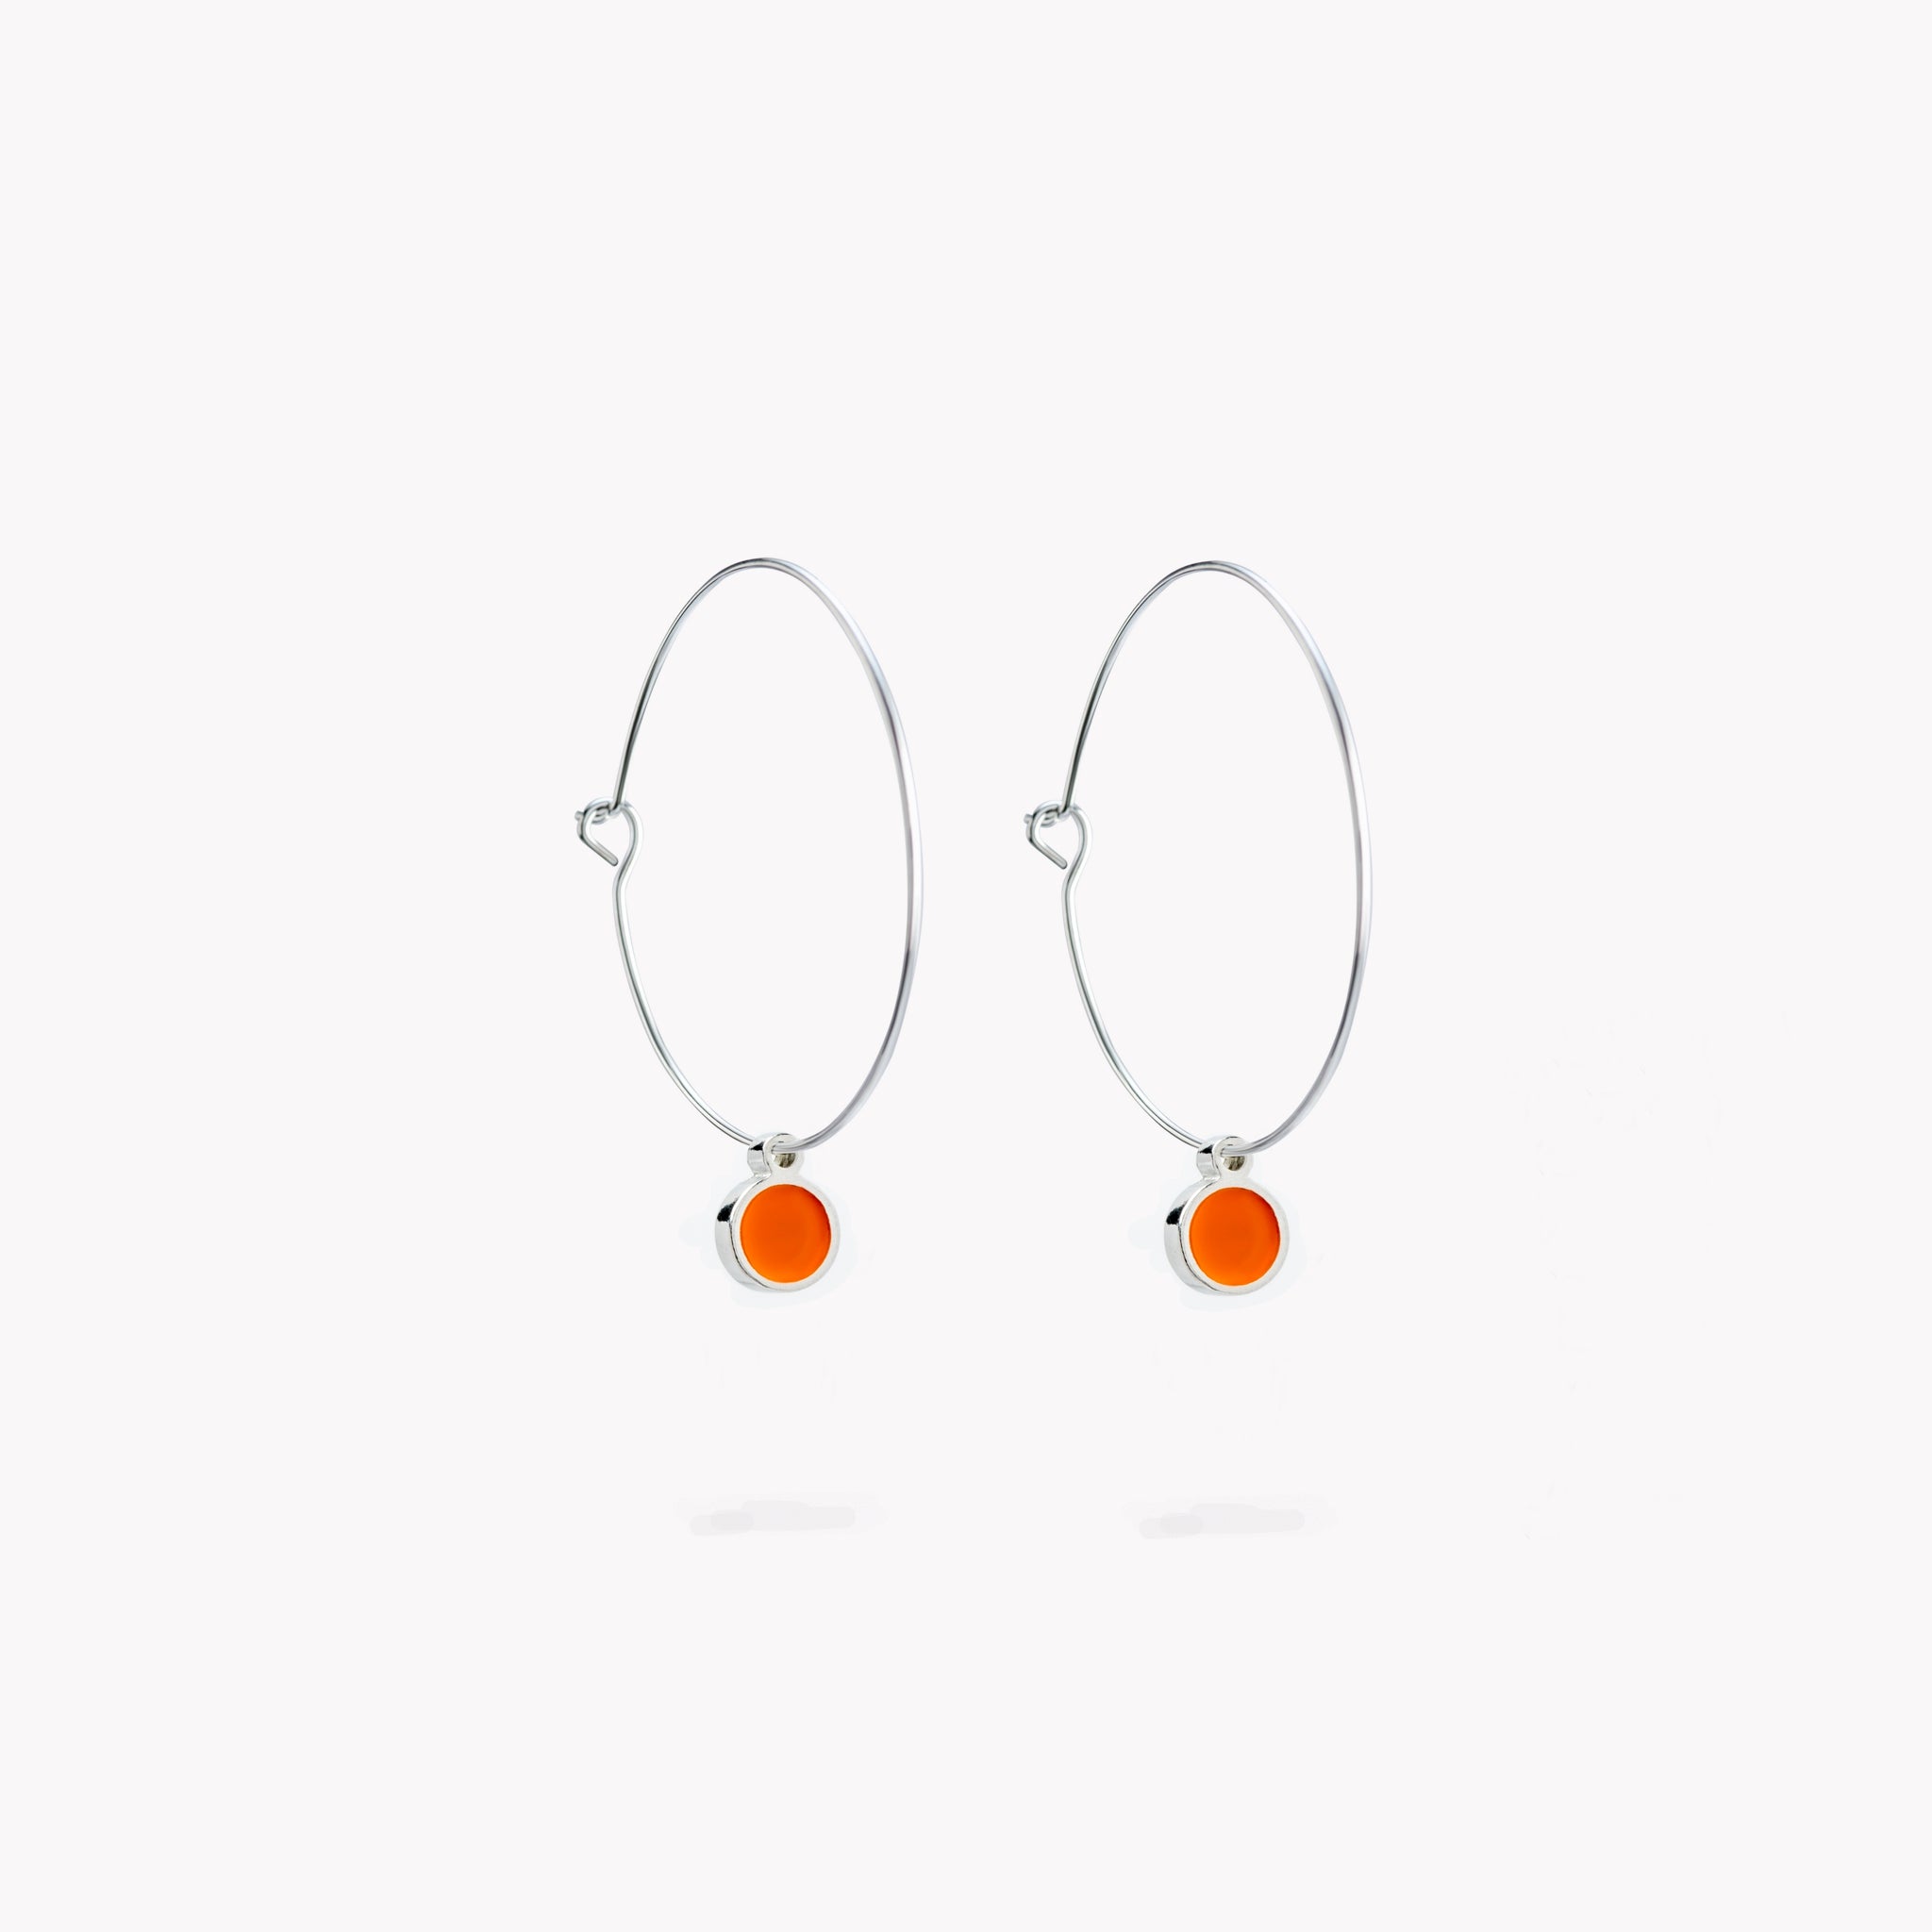 A pair of simple hoop earrings, each with a bright orange hanging circular form.